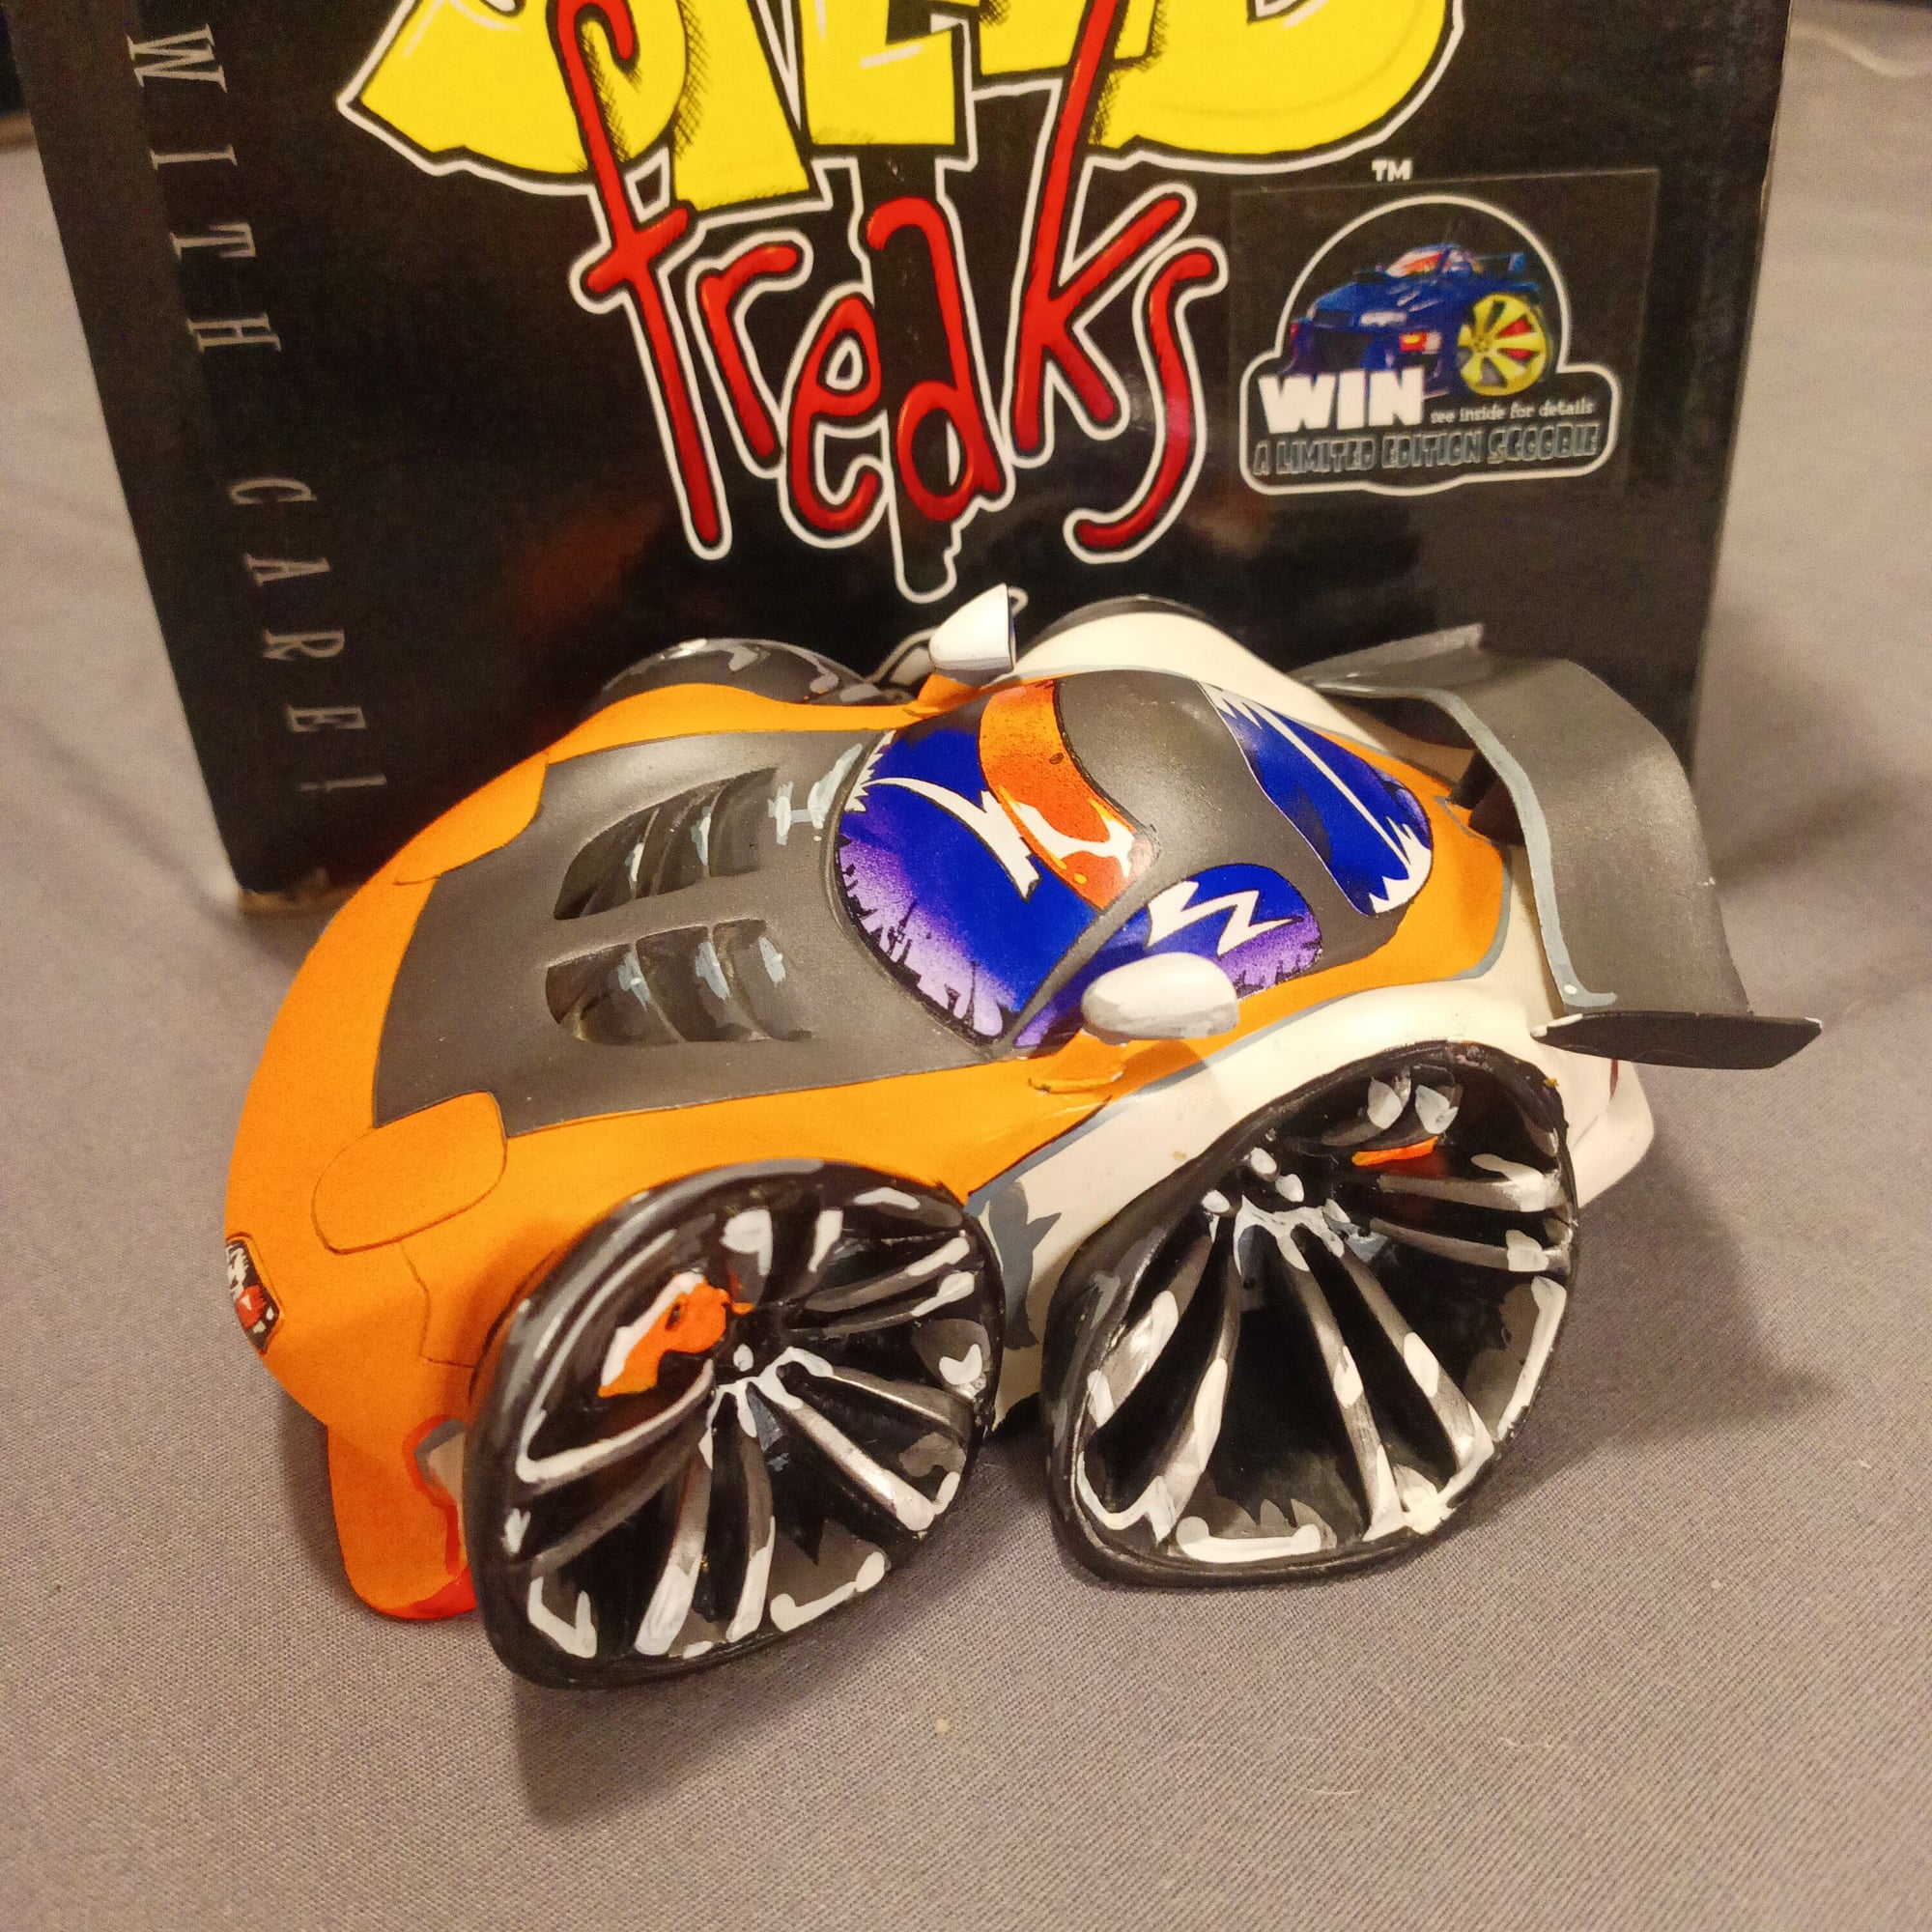 Miscellaneous - Rx7 fd "Speed Freaks" collectible sculpture - Used - 1979 to 2004 Mazda RX-7 - San Leandro, CA 94578, United States